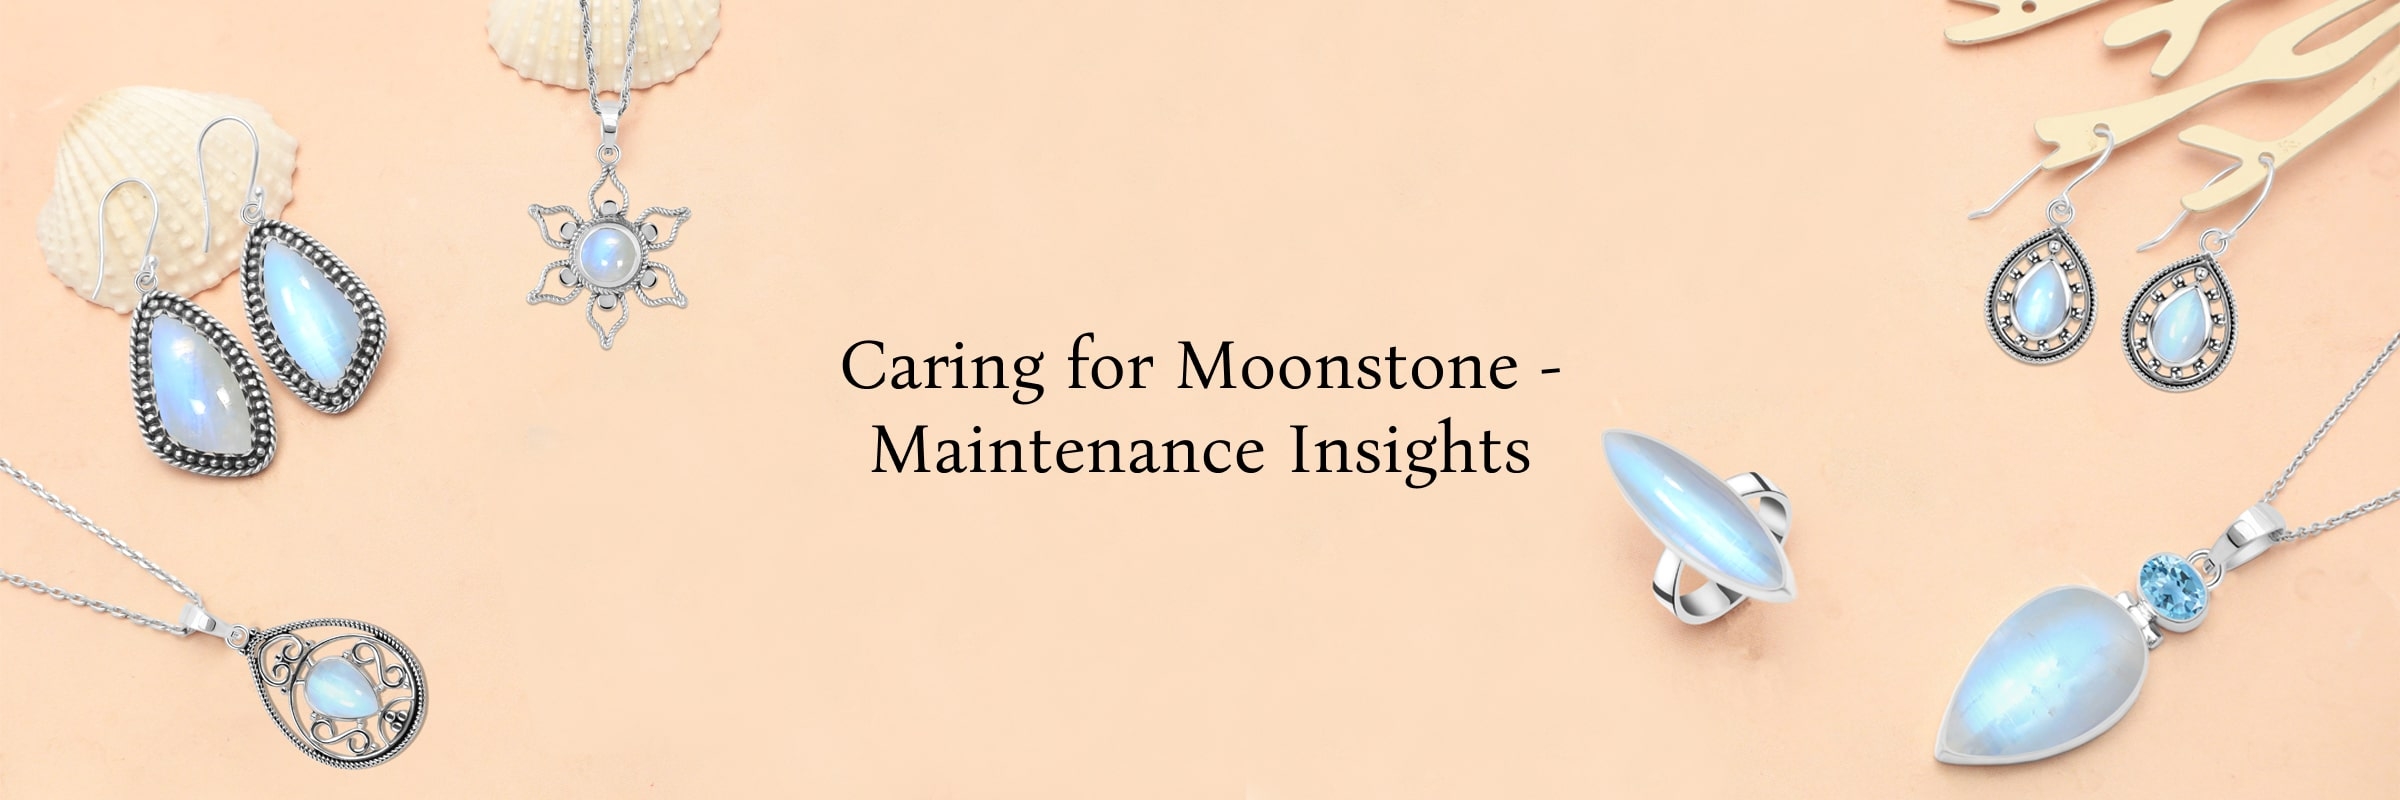 Moonstone's Care and Maintenance